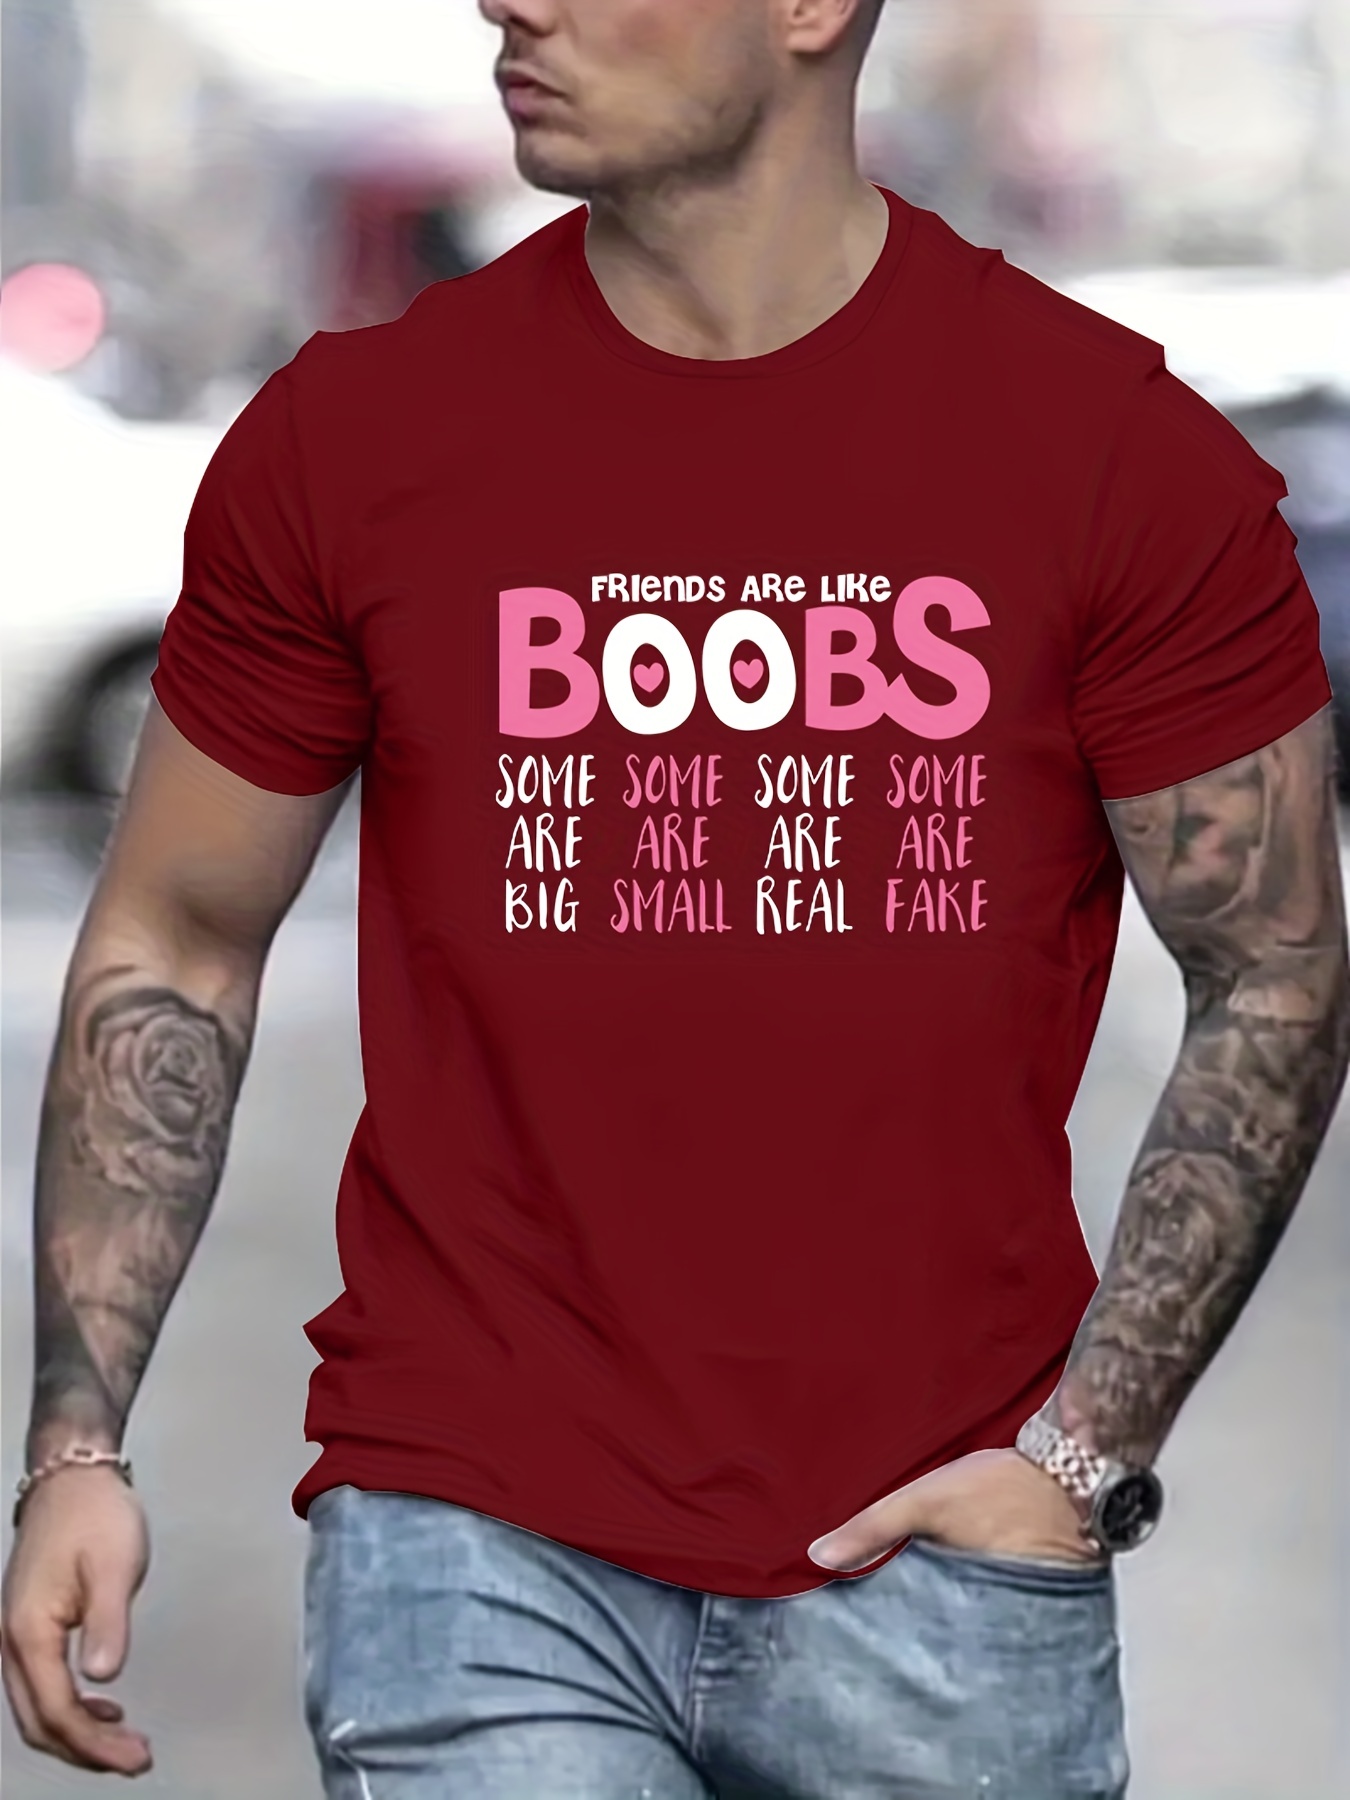 Boobs t-shirt, funny boobs shirt, boobs t-shirt, gift for friend, gift for  her, funny tee | Essential T-Shirt